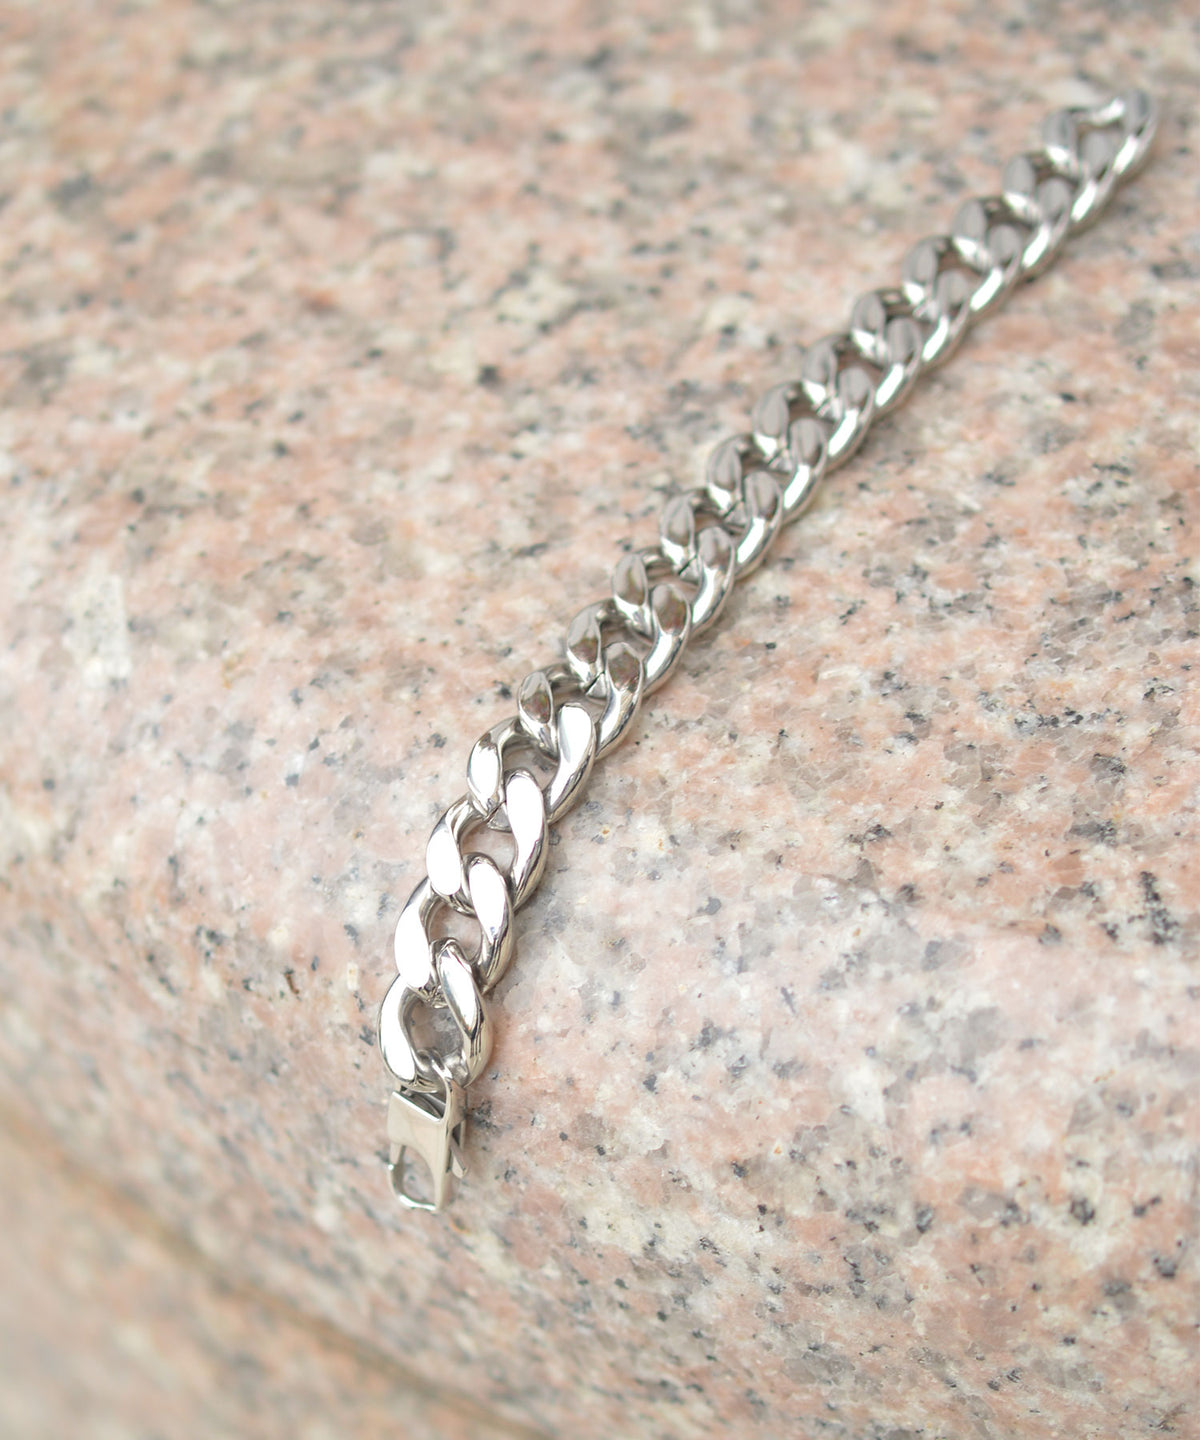 【Takeru. for BROTHERHOOD】Bold Chain Bracelet "Surgical Stainless Steel 316L"-Stainless SILVER